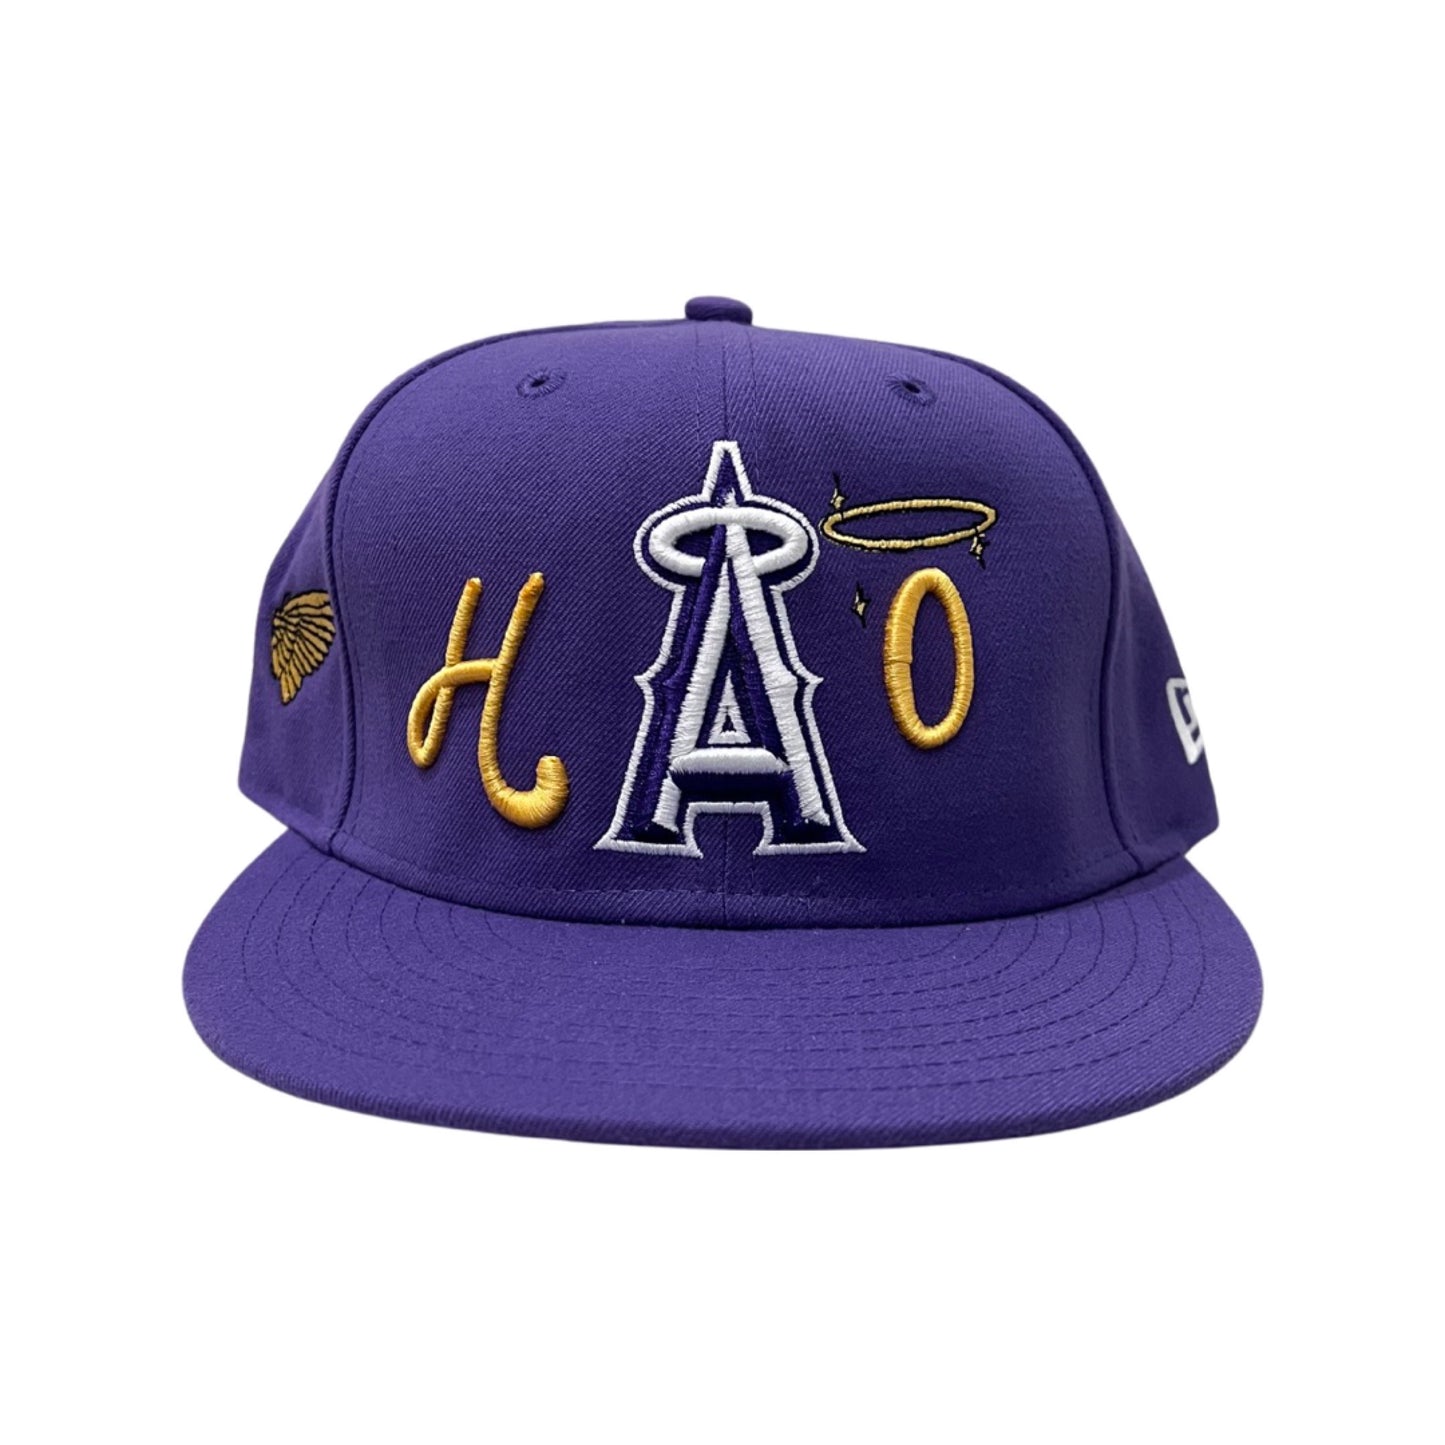 2/12 HALO FITTED HAT SIZE 7 1/8